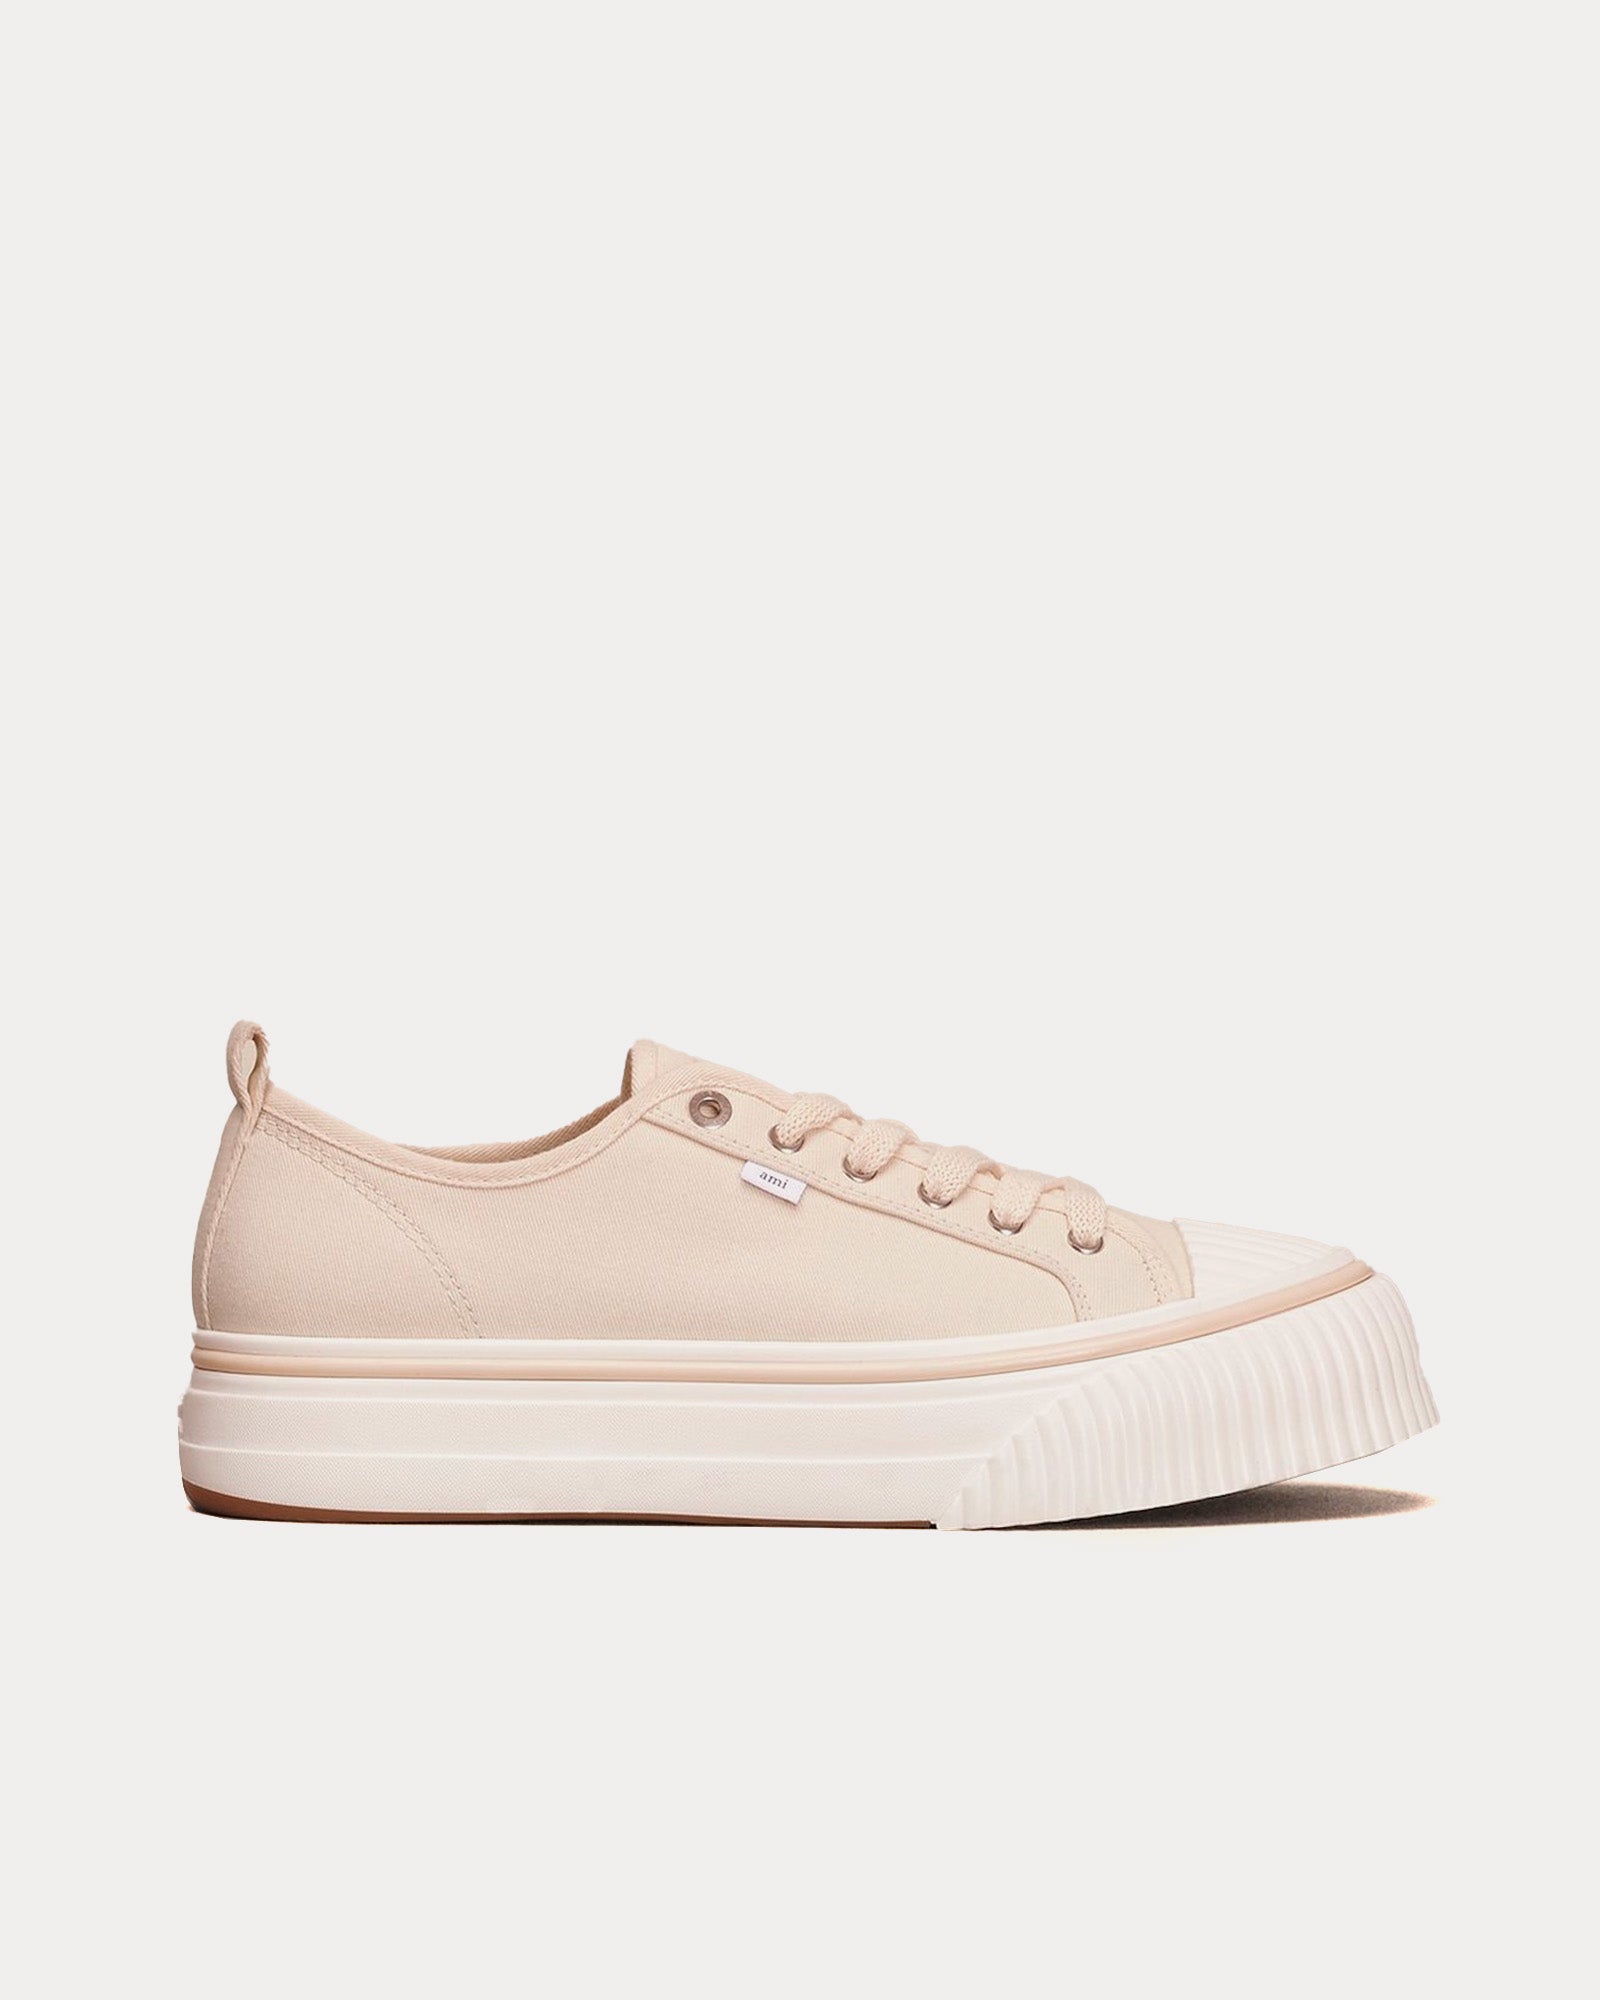 AMI - 1980 Canvas Off White / White Low Top Sneakers